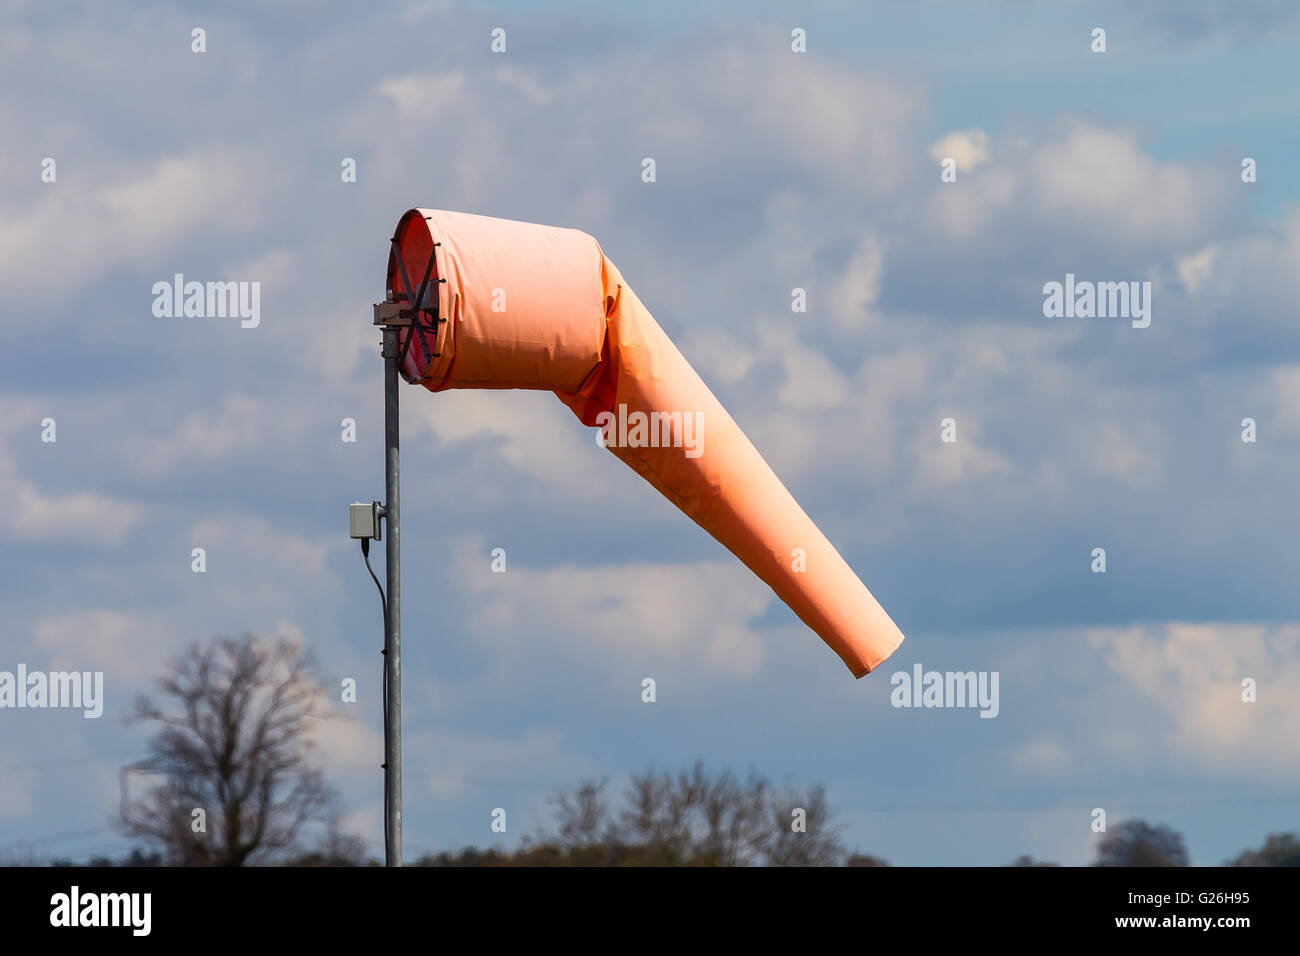 A bright orange windsock showing a light breeze against a sky of fair weather cumulus clouds Stock Photo